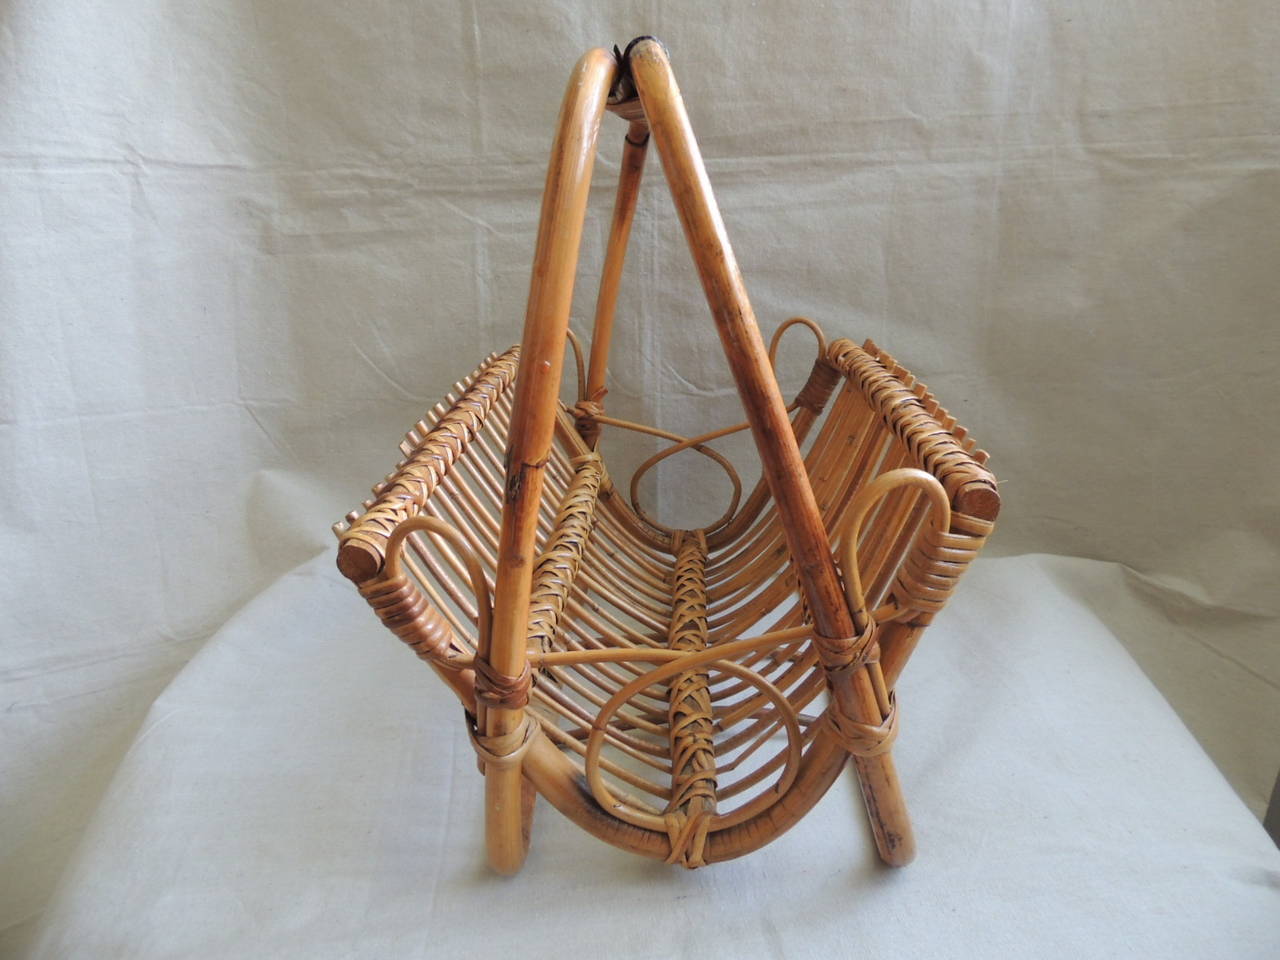 Vintage magazine holder or rack in bamboo and rattan weaving. Very strong. Nice patina.